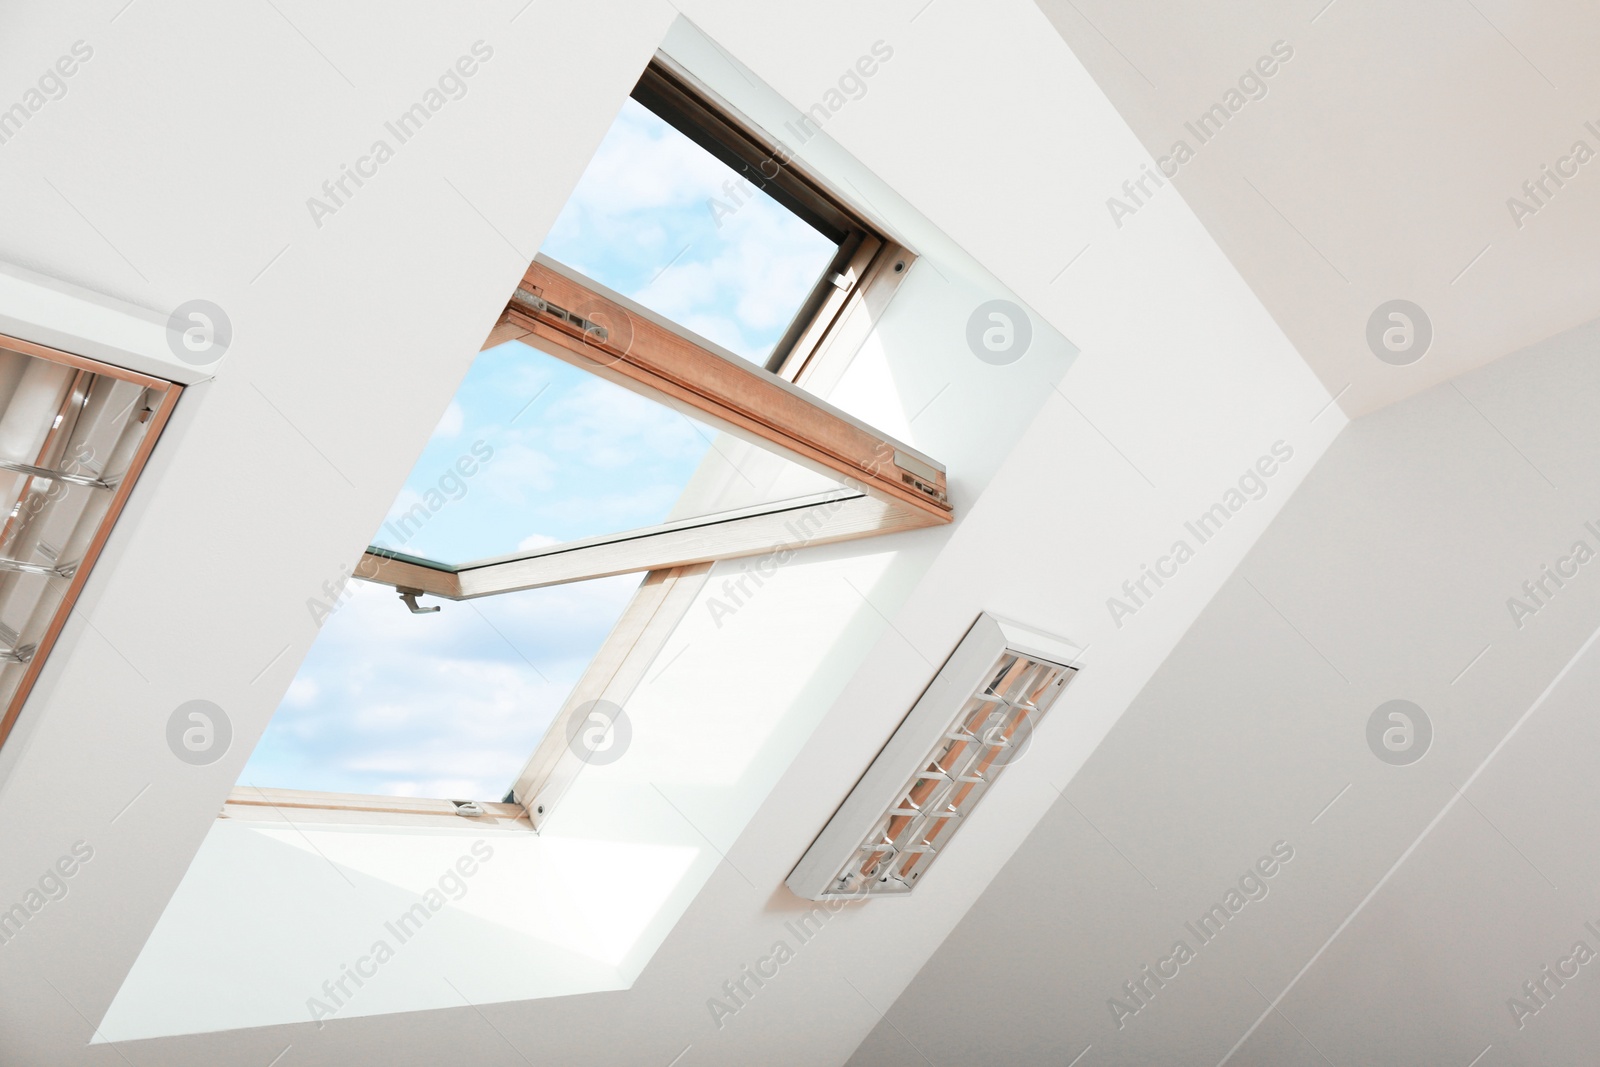 Photo of Open skylight roof window on slanted ceiling in attic room, low angle view